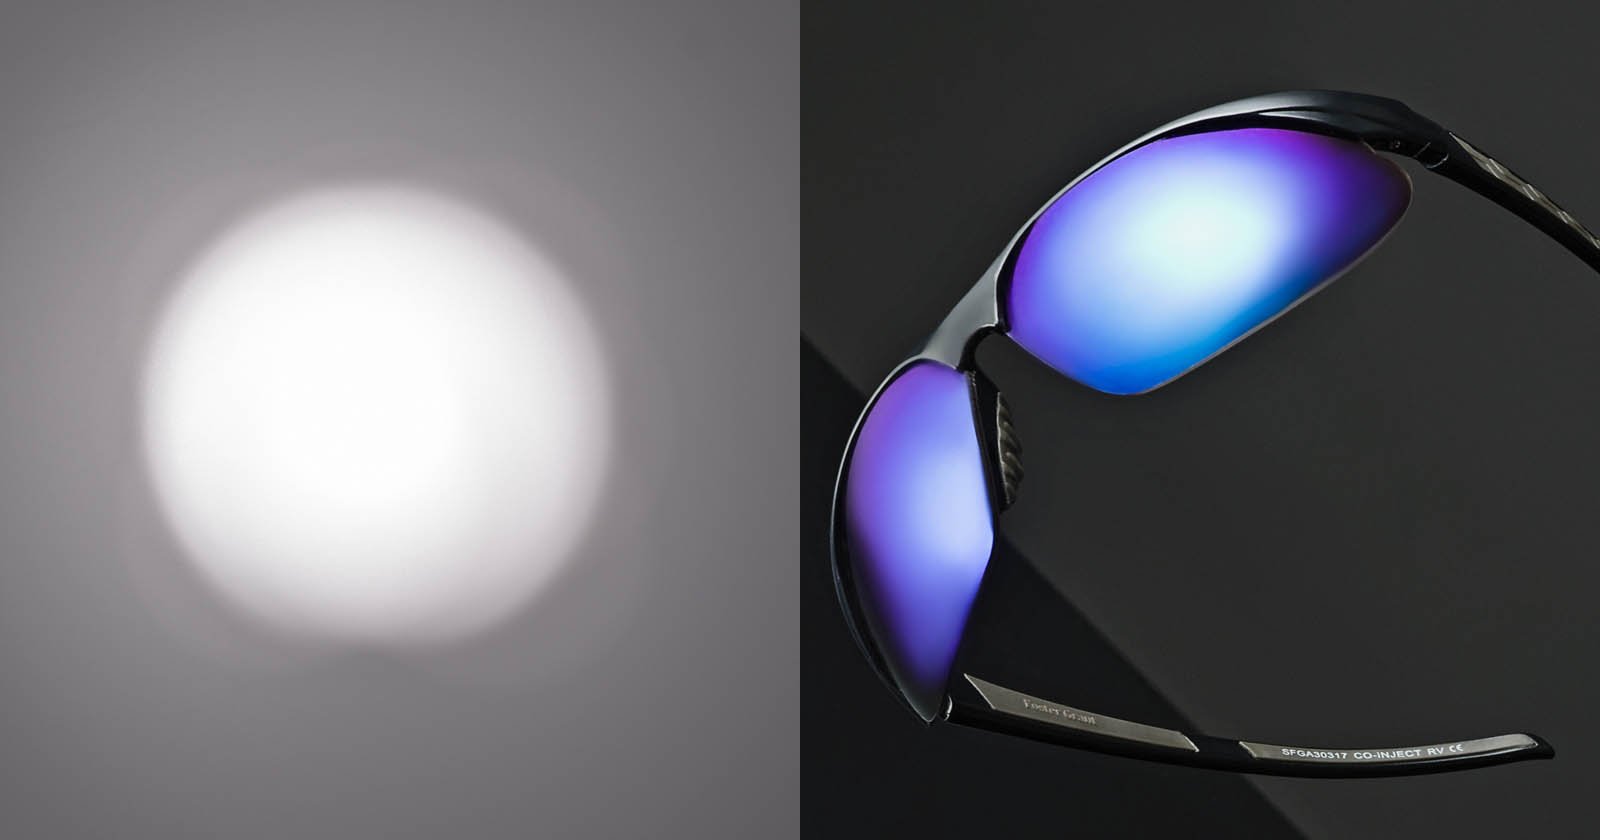  how create gradients light product photography 